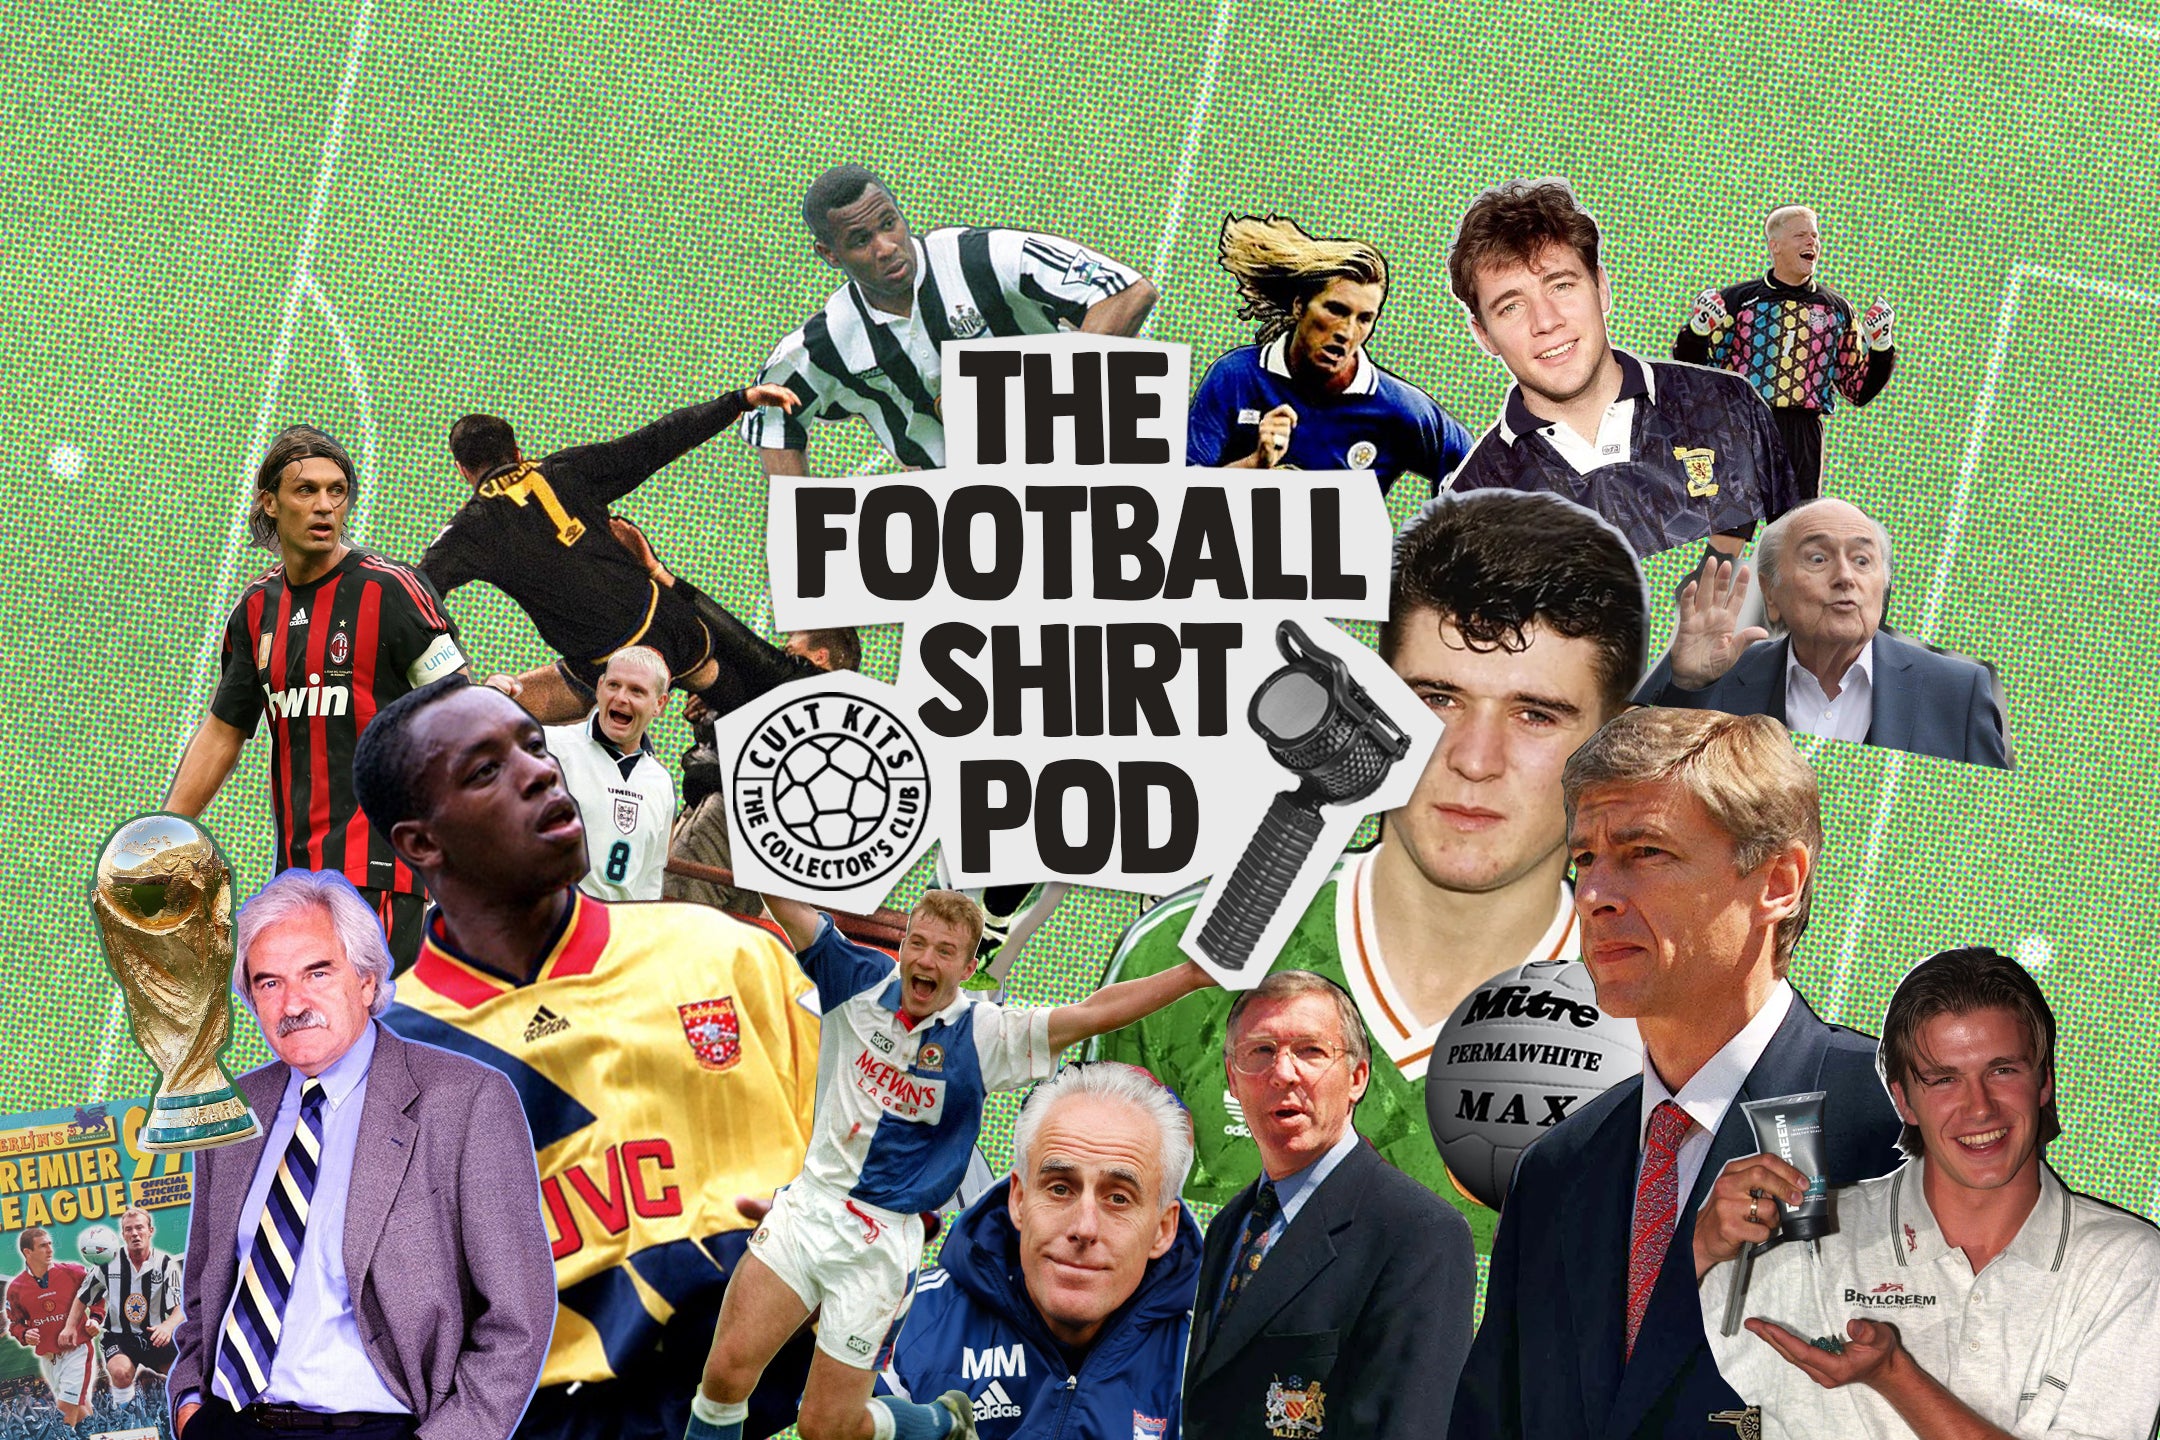 Interviews, stories, shirts and loads of other stuff in between. Welcome to The Football Shirt Pod from Cult Kits.